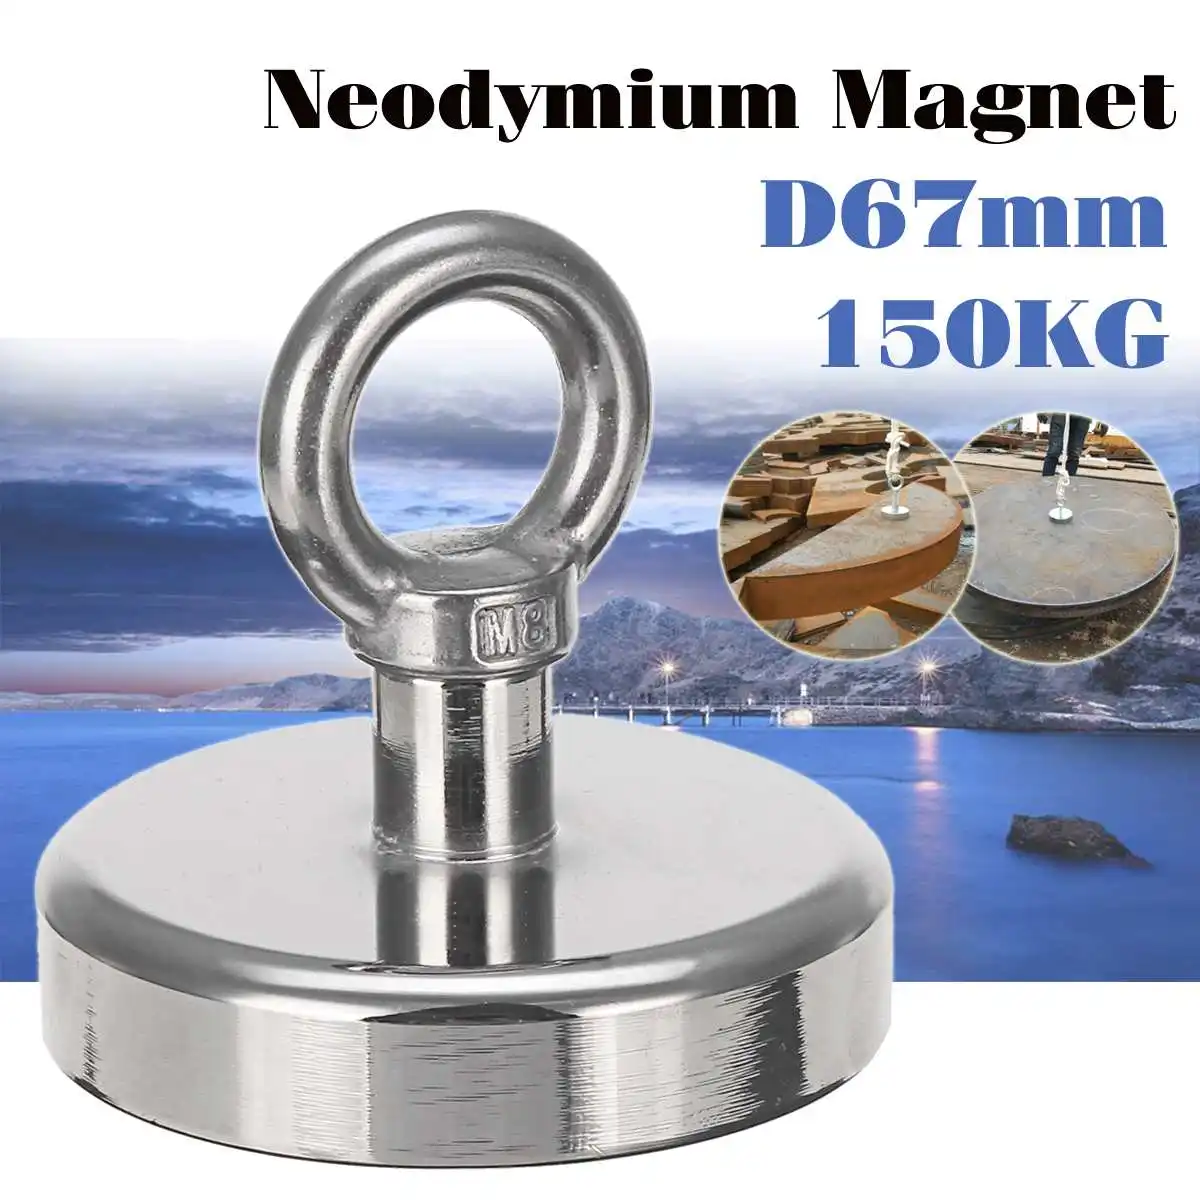 

Super Strong D67mm 150KG Neodymium Fishing Diving Salvage Recovery Magnet For Detecting Metal Treasure Powerful Magnetic Holder